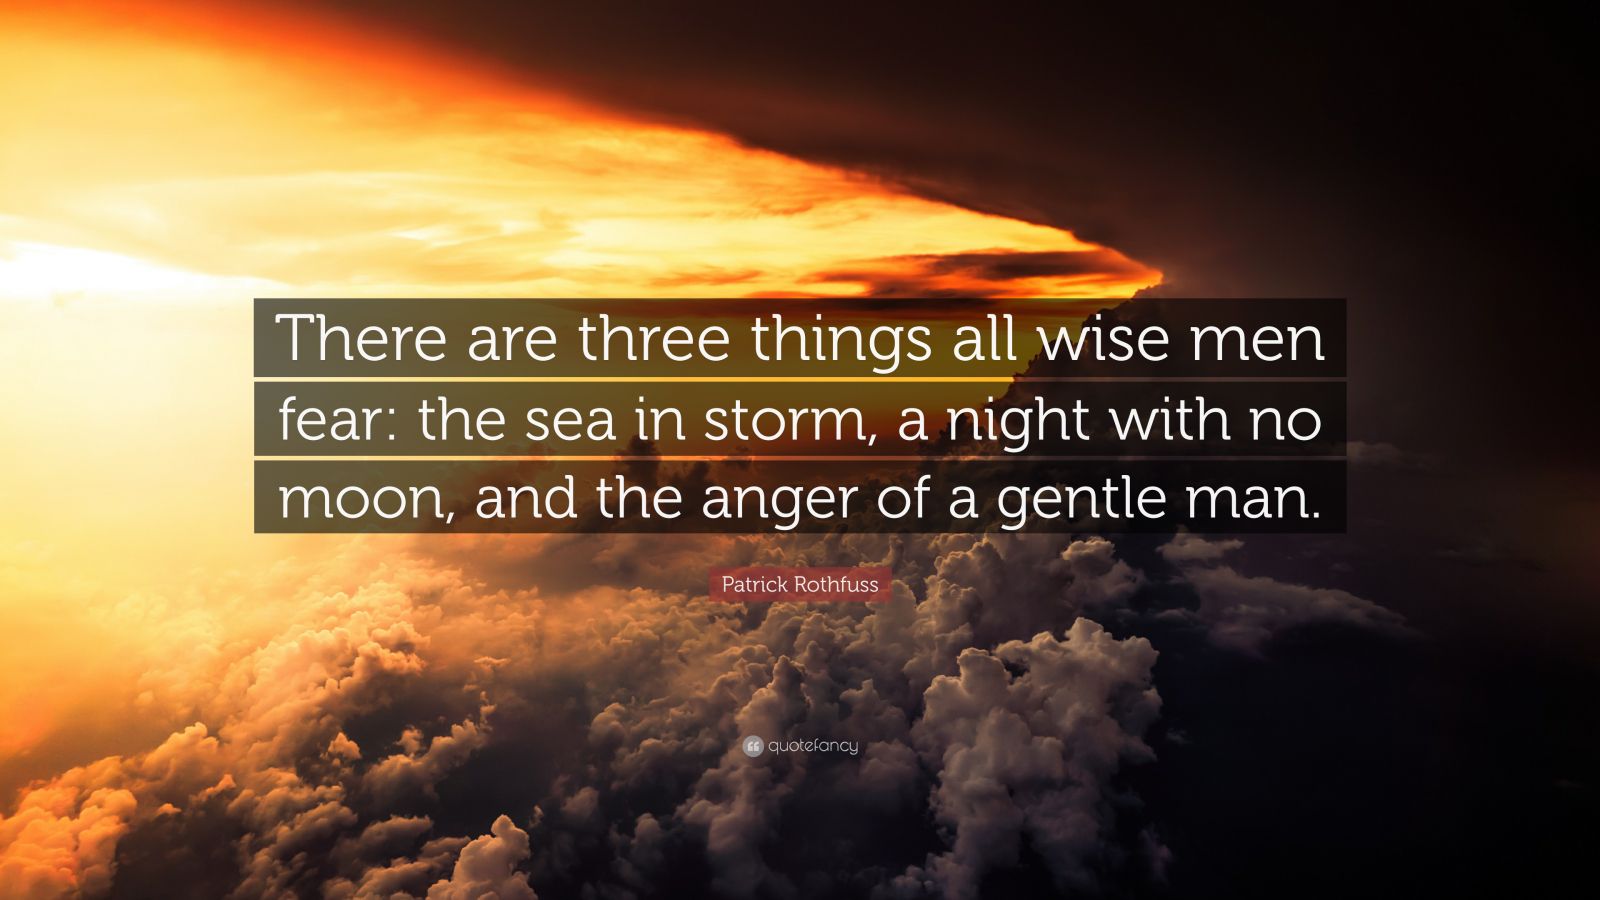 Patrick Rothfuss Quote: “There are three things all wise men fear: the